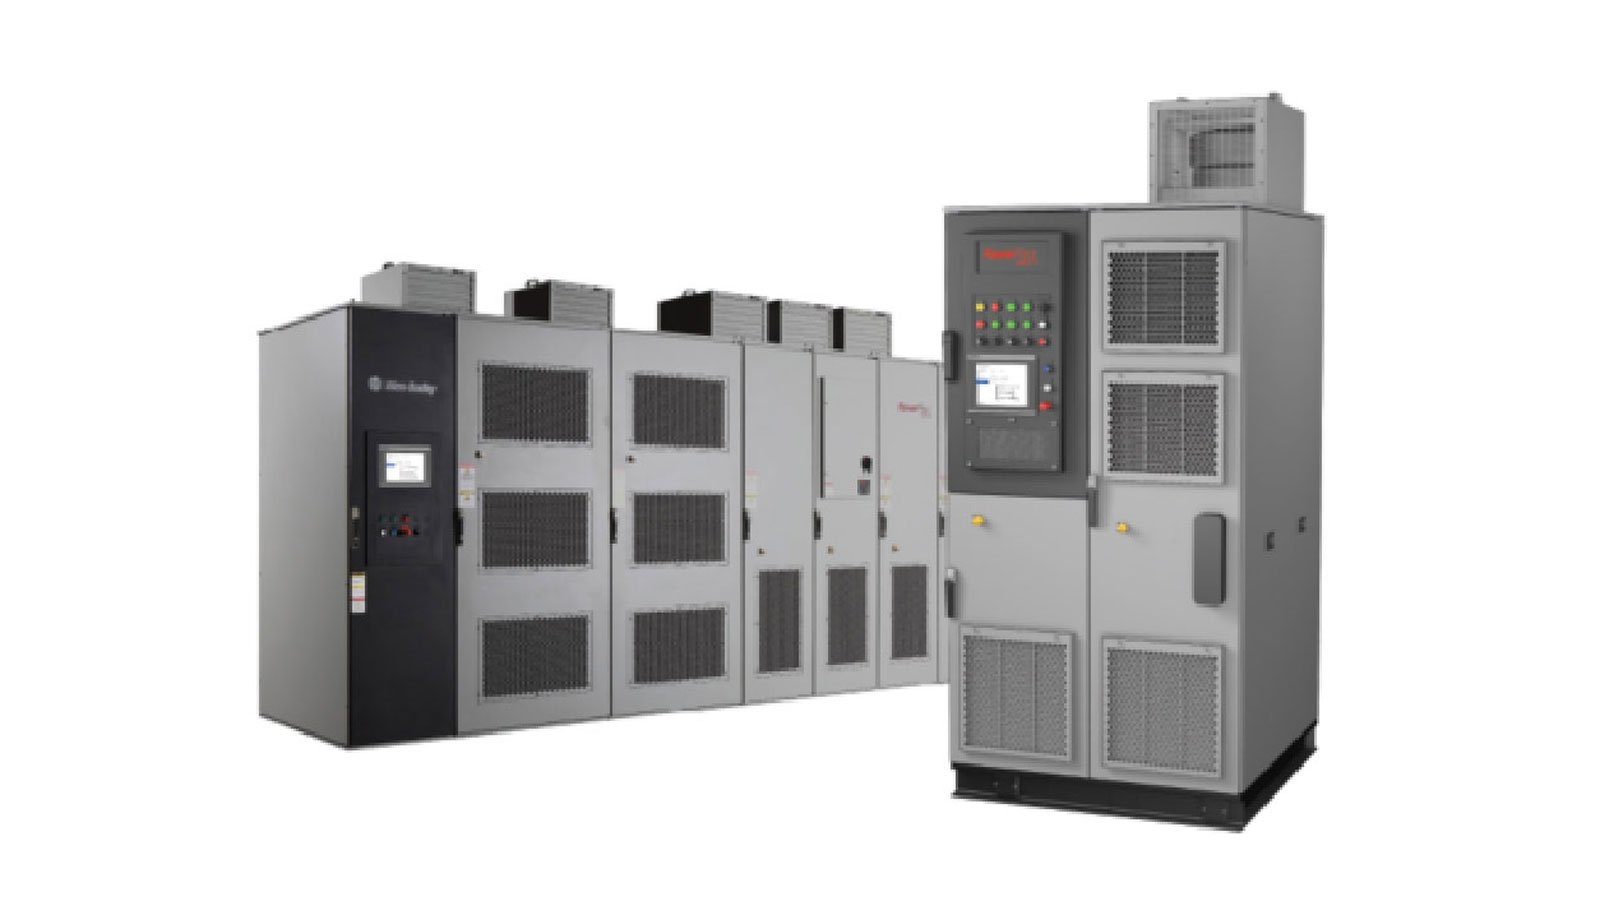 PowerFlex® 6000 Medium Voltage AC Drives | New and retrofit, variable and constant torque applications – fans, pumps, compressors, conveyors and mills | Motor control applications from 100 kW to 11,000 kW (190 Hp to 14,600 Hp) for motors rated 2.3...11 kV and input voltages up to 13.8 kV